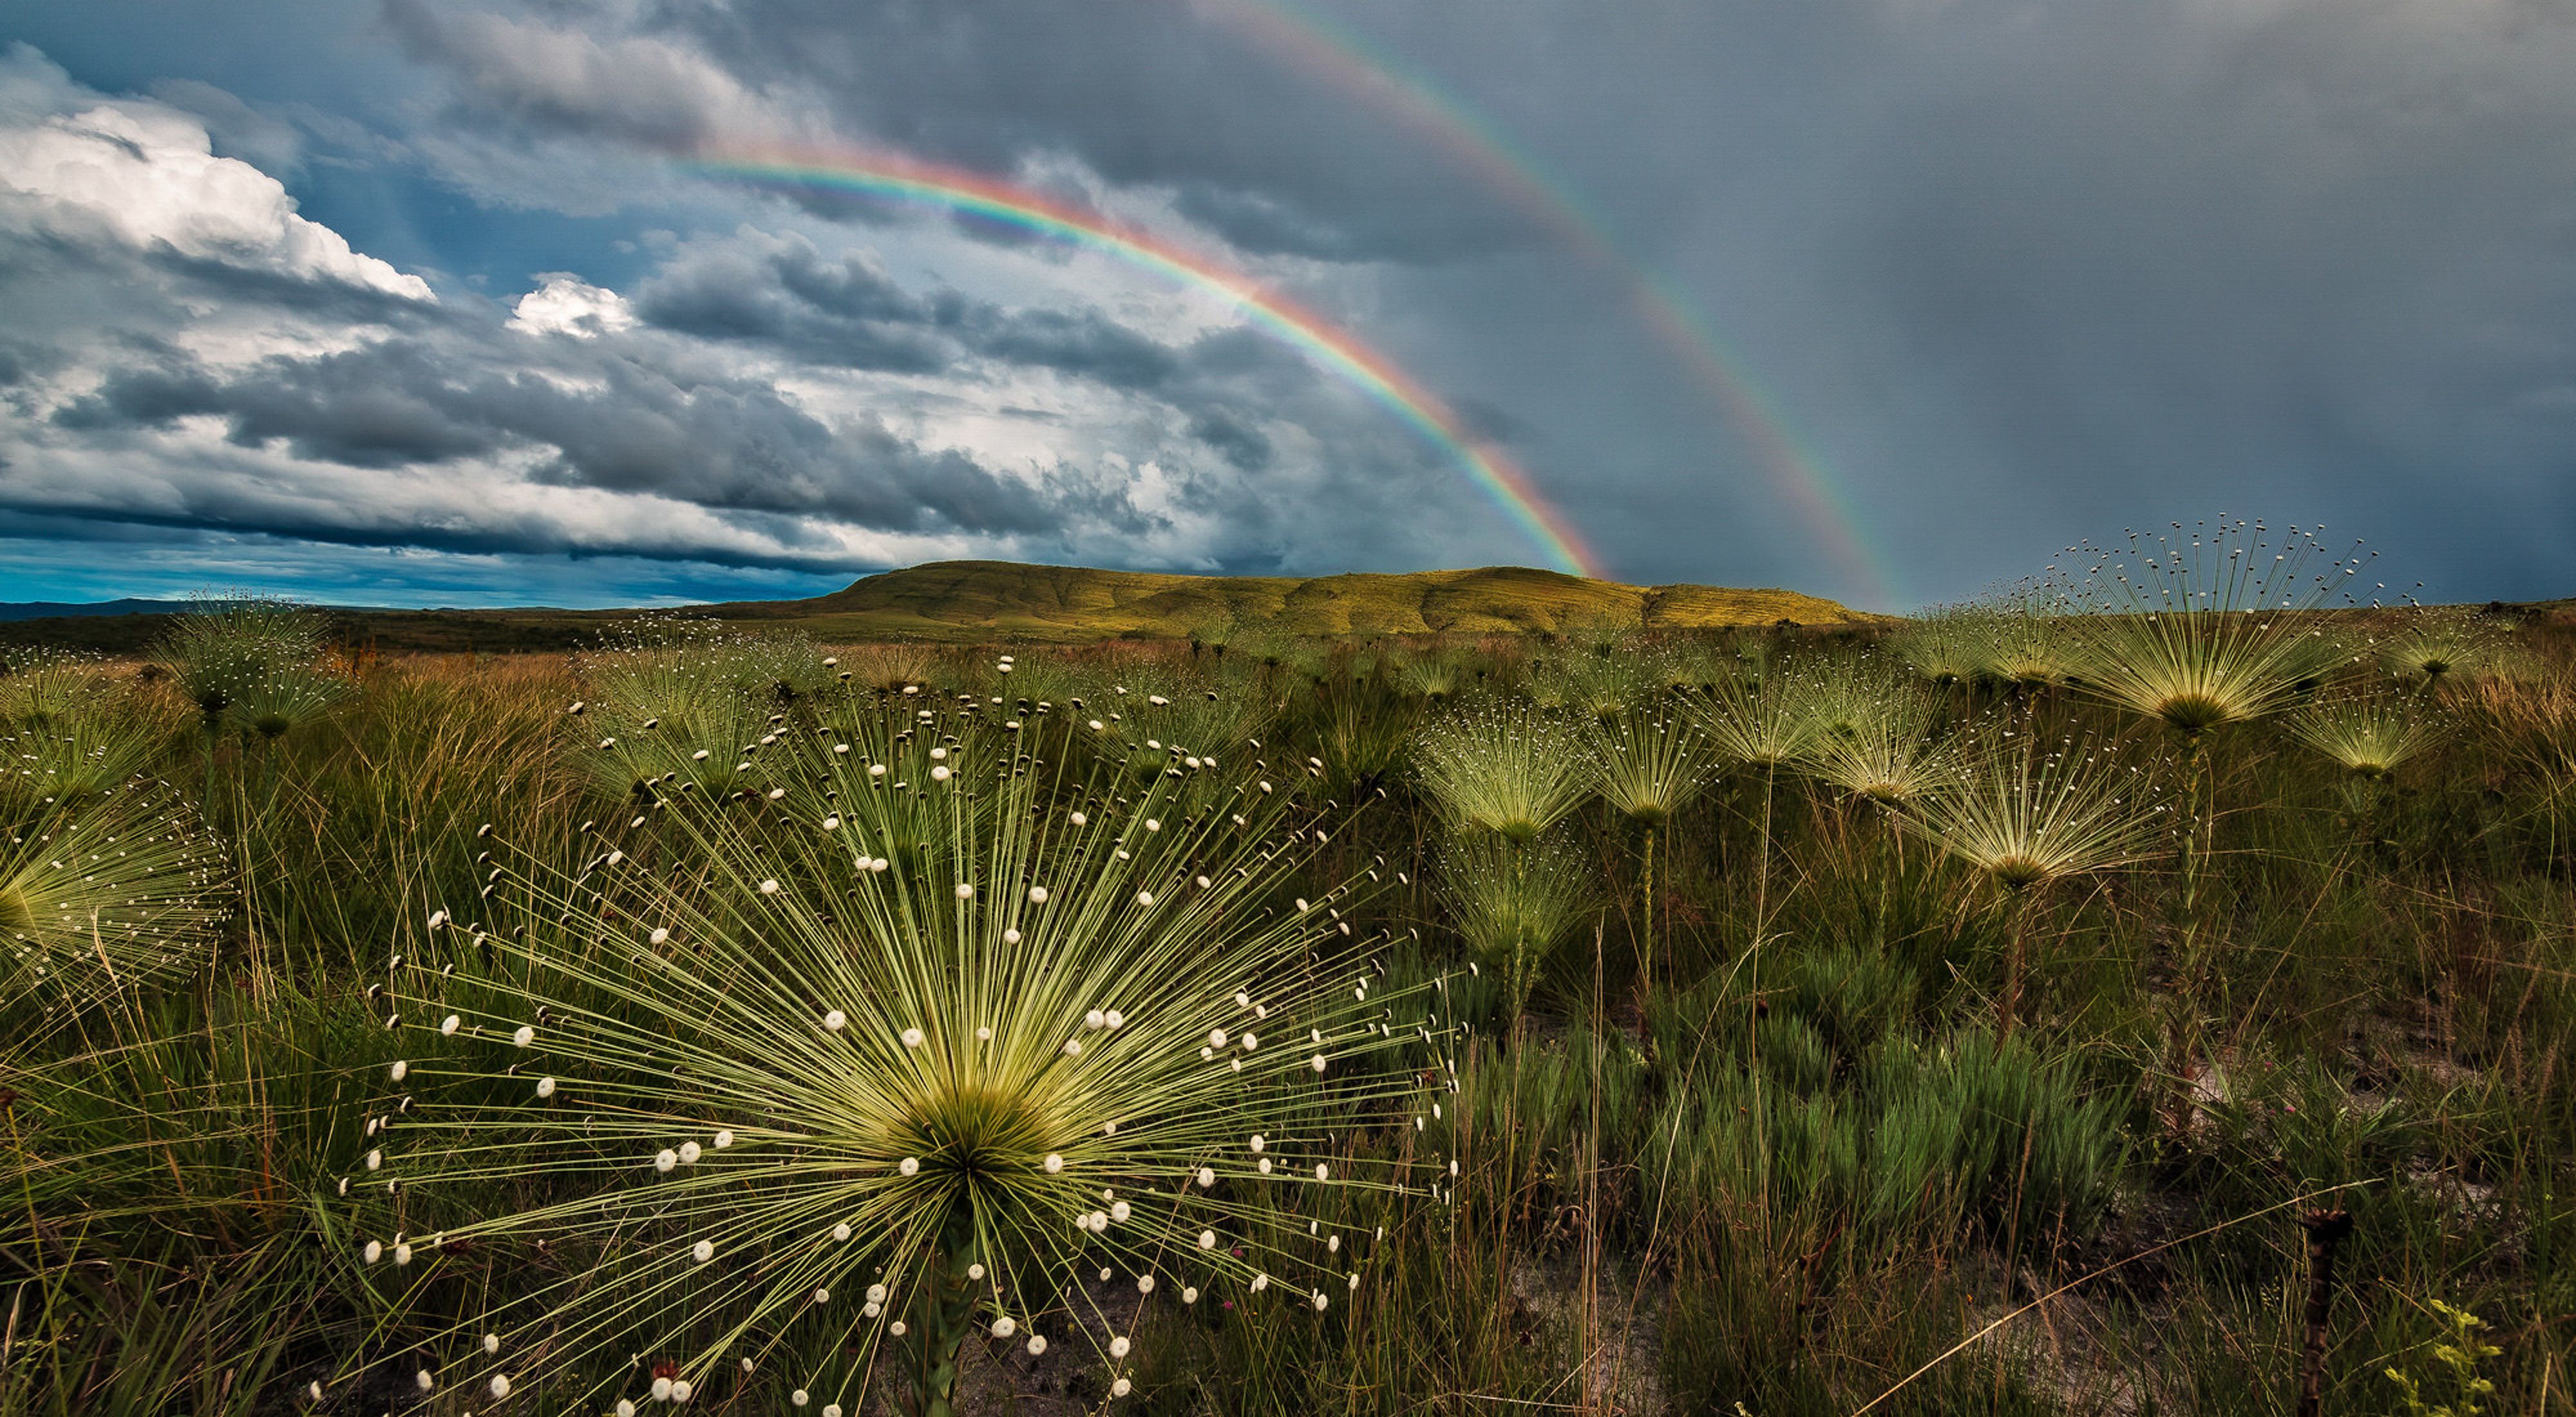 A close up of Cerrado grasslands with a view of hills and a double rainbow in the distance.